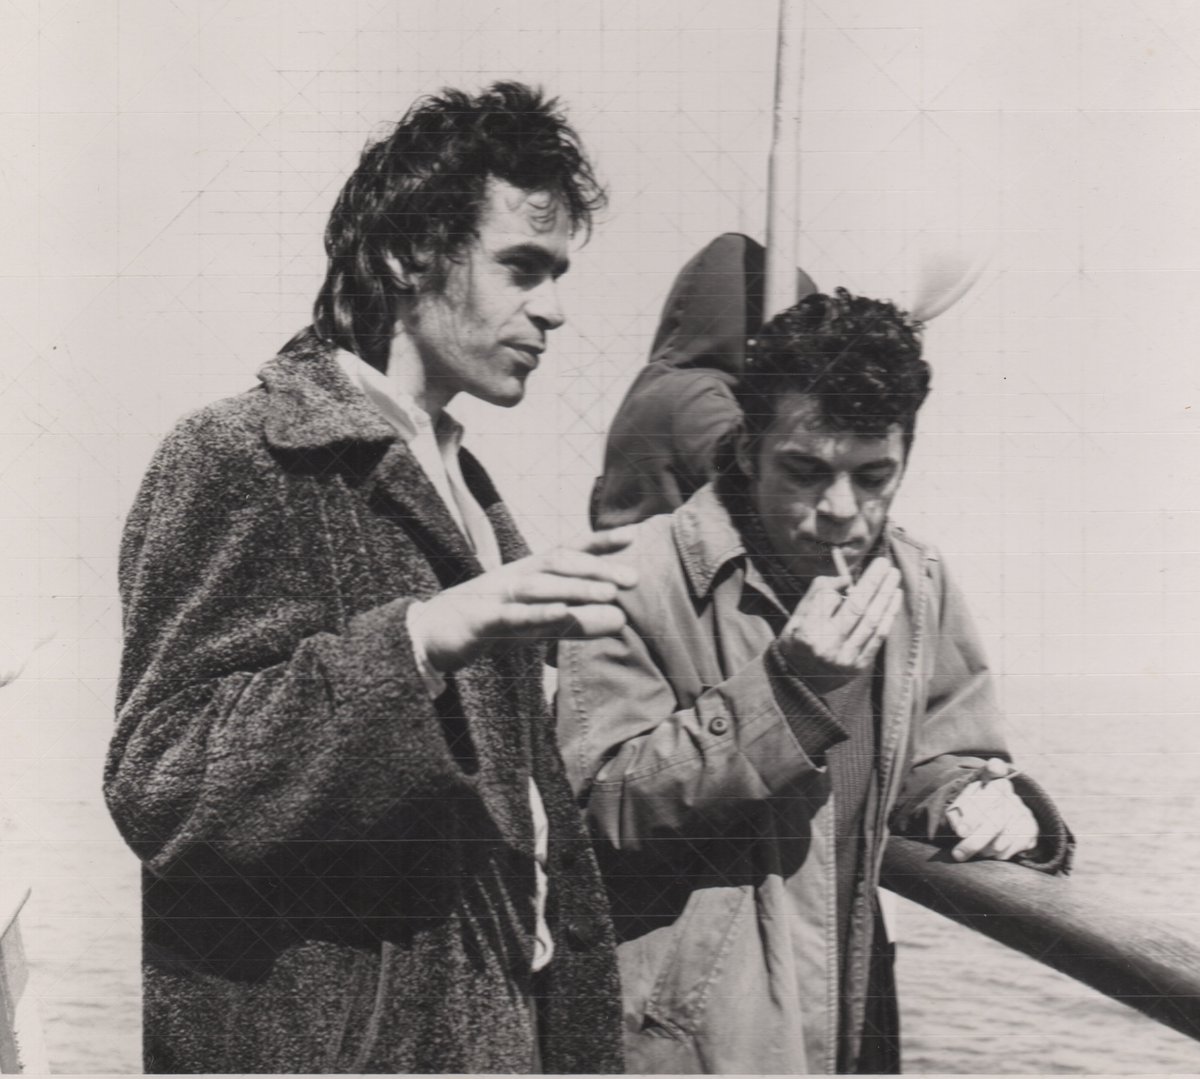 Ian Dury 12 May 1942 - 27 March 2000. Ian with his friend Martin 'Smart' Cole on the boat to Lundy Island c1978. 📸© Elizabeth Rathmell